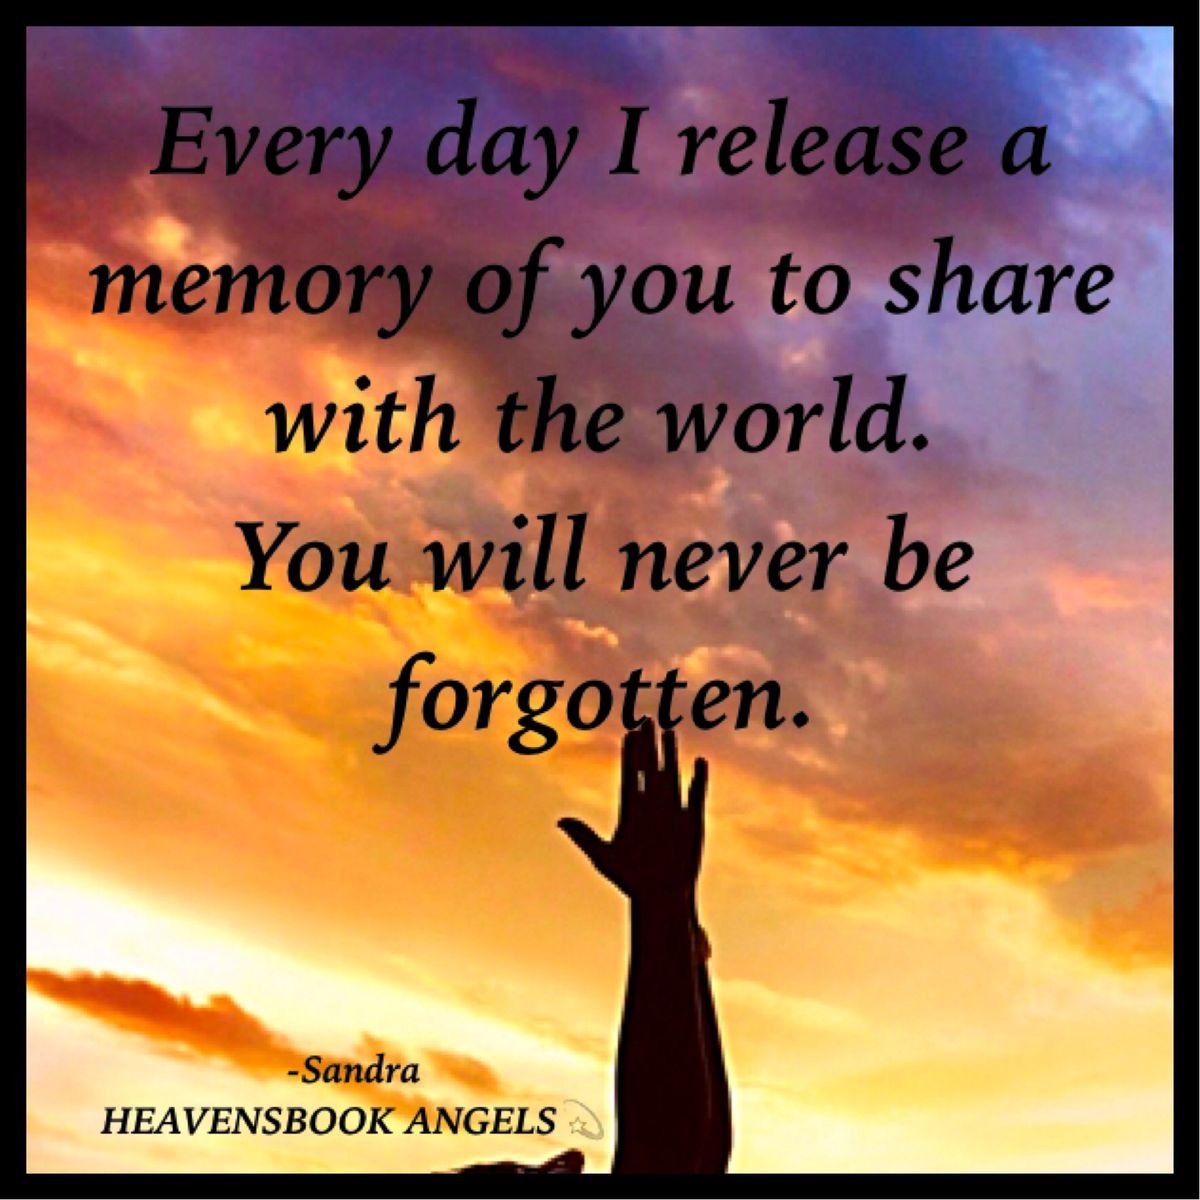 quotes grief loss angels memory release heavensbook artwork poems angel heaven support friends grandma sandra daughter mother grieving thegrieftoolbox written